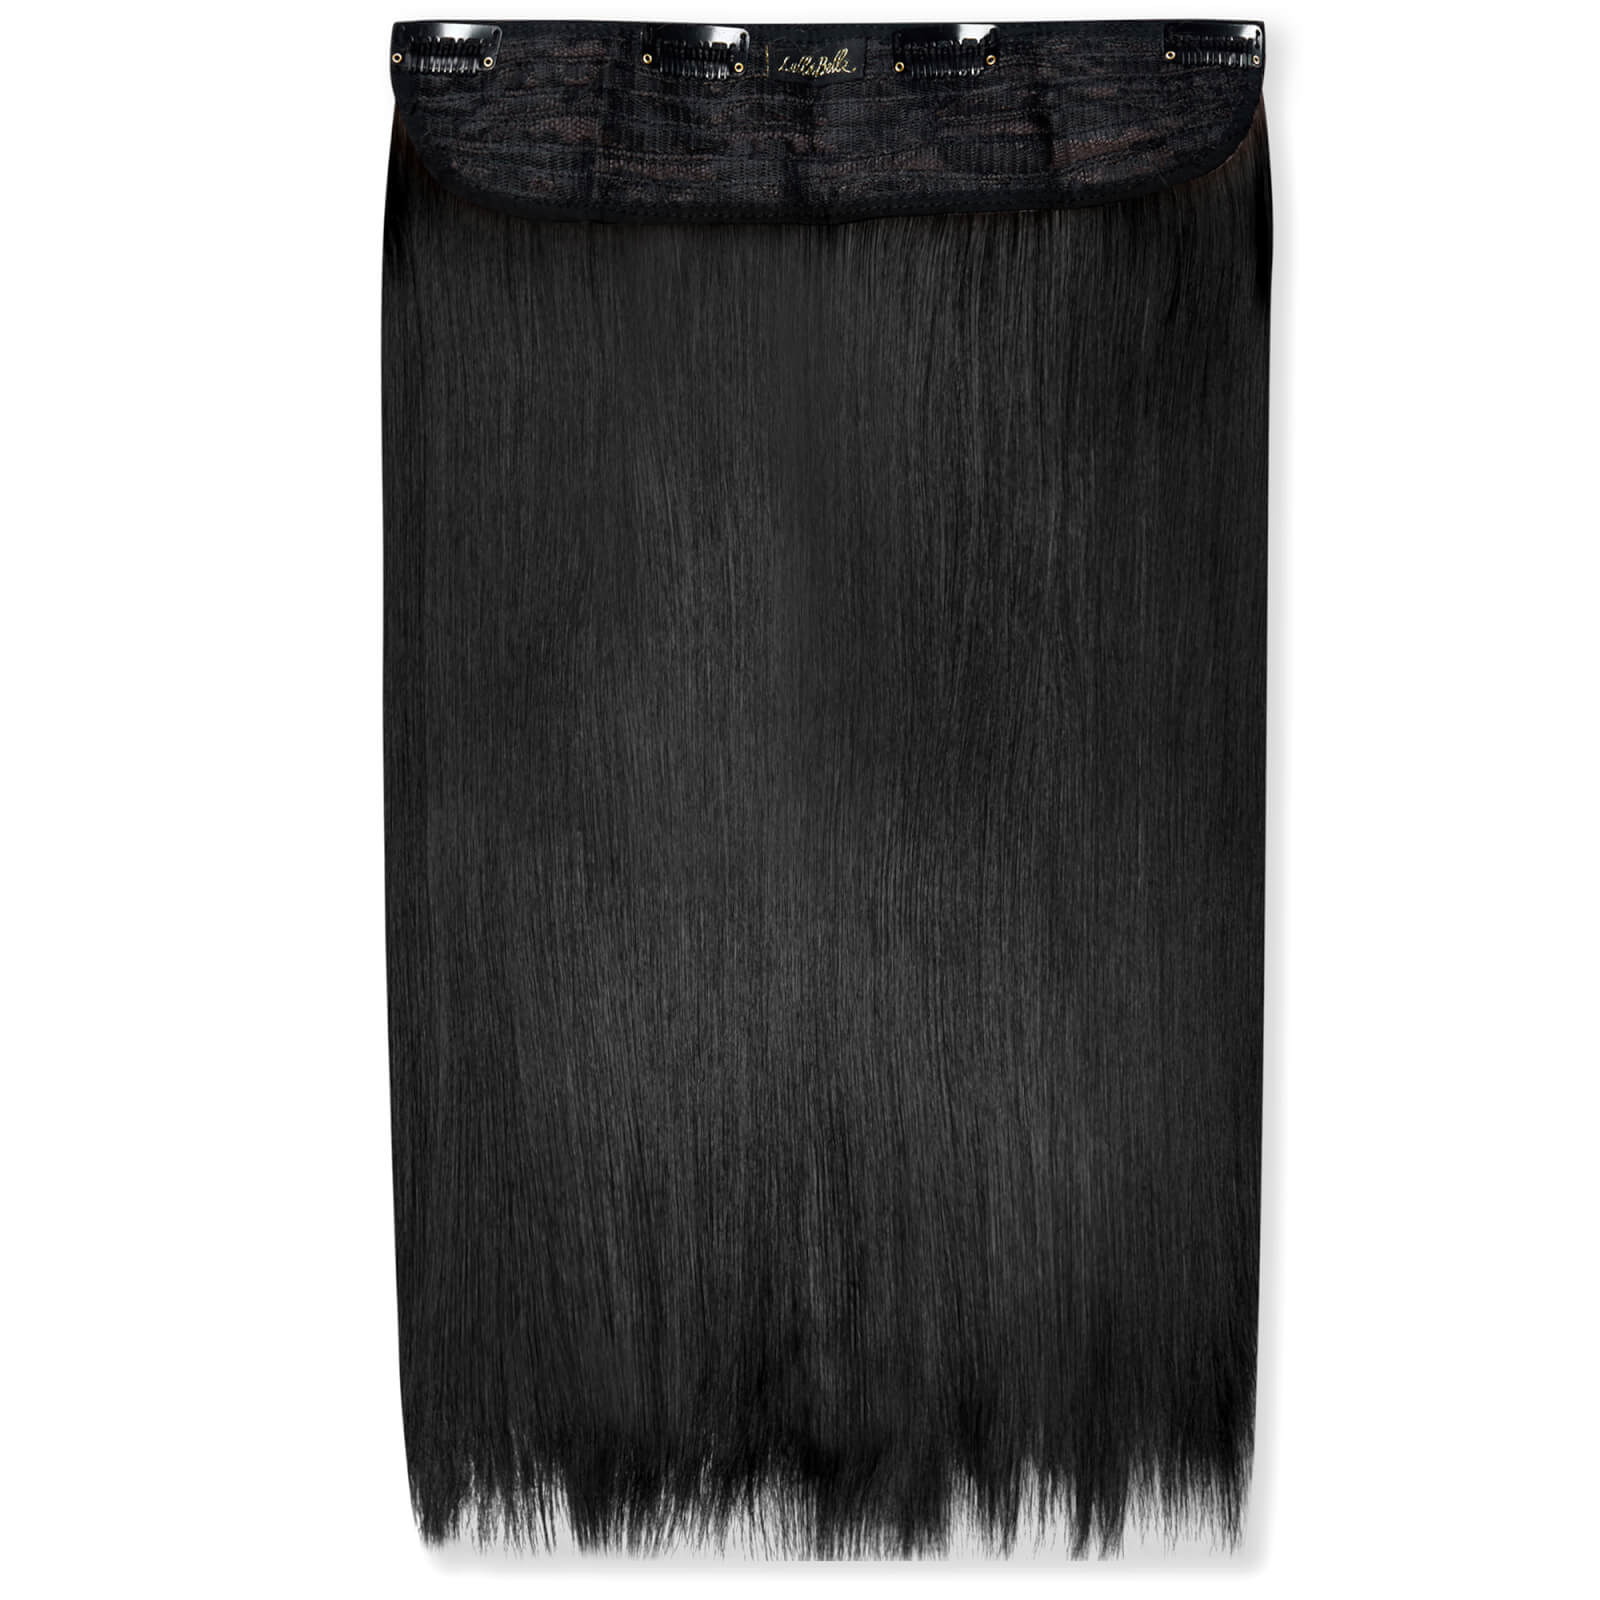 LullaBellz Thick 18 1-Piece Straight Clip in Hair Extensions (Various Colours) - Natural Black von Lullabellz